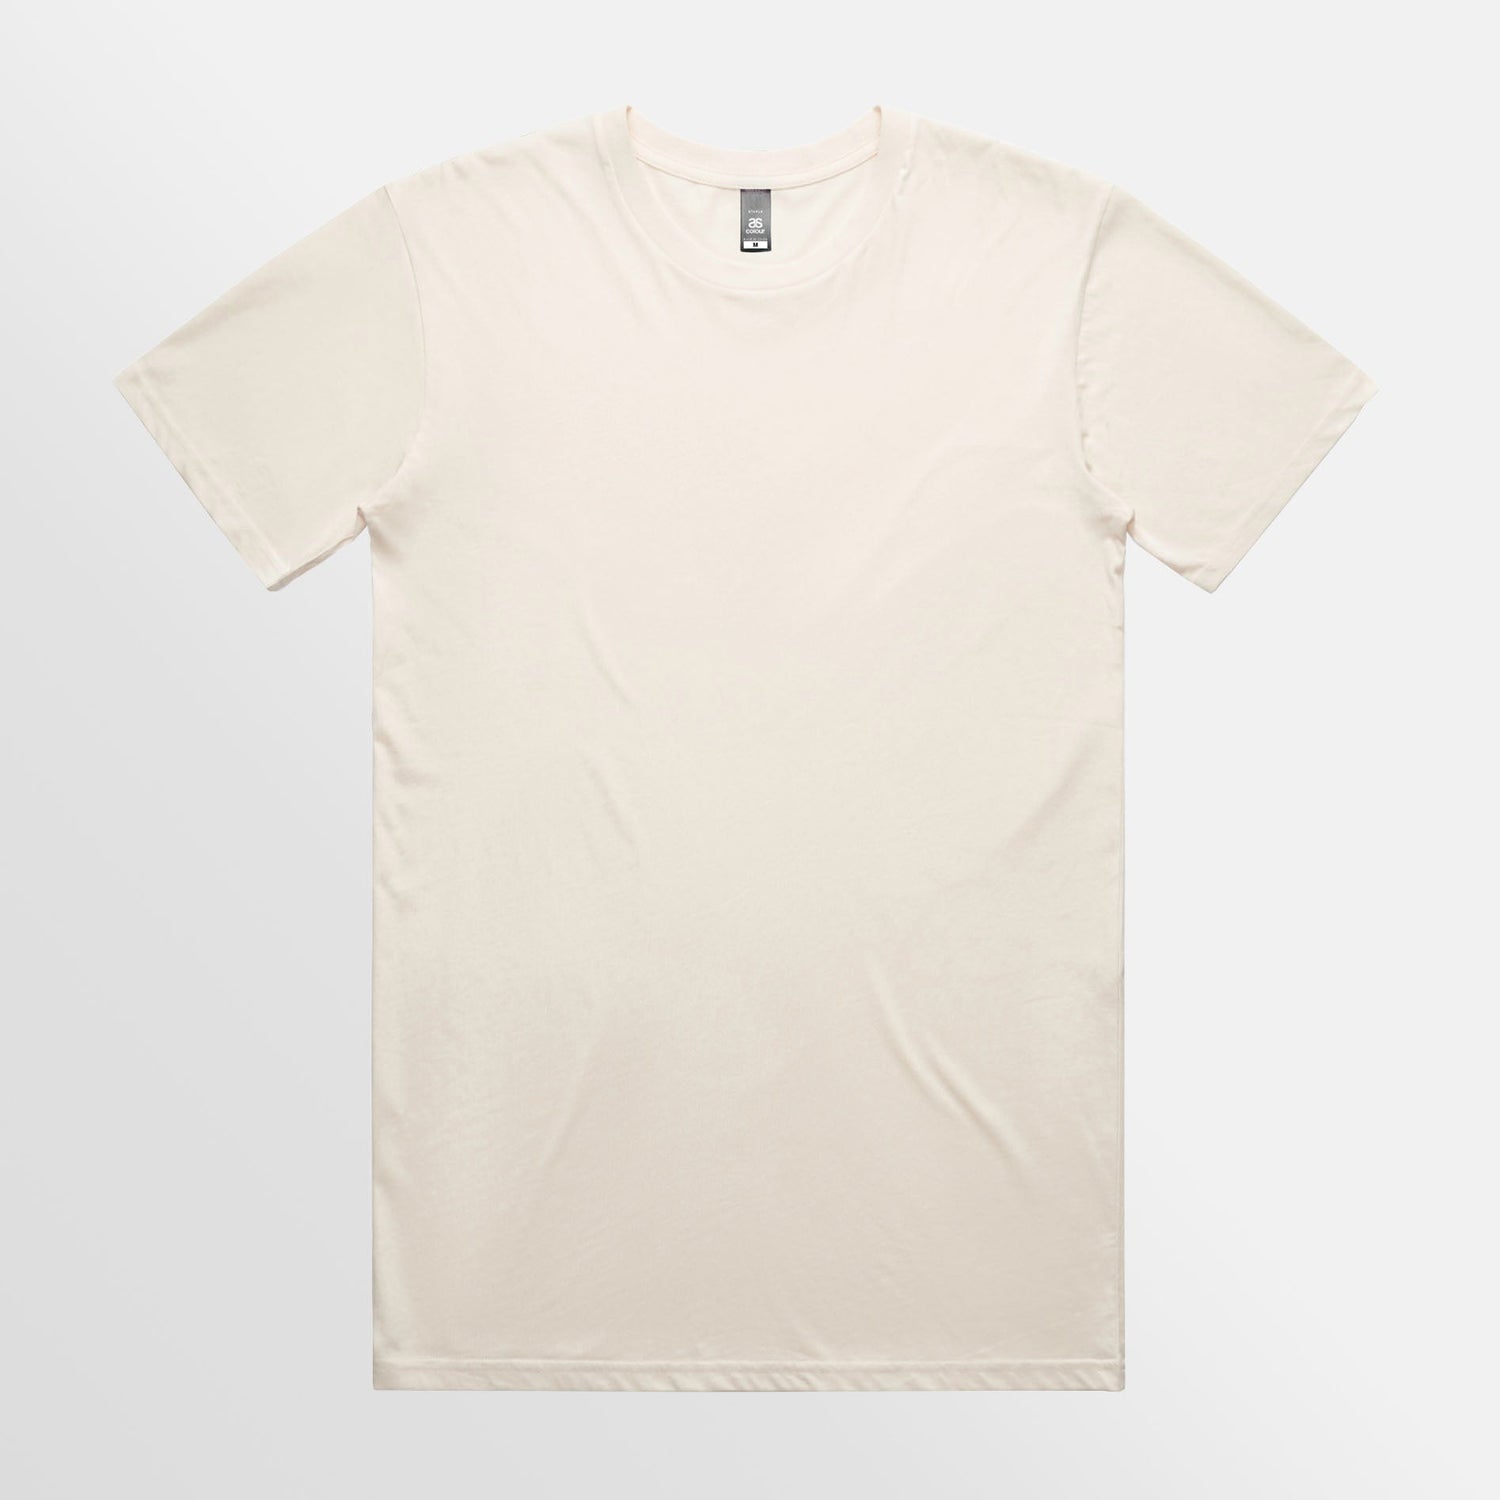 Staple Tee PLUS SIZE - on request